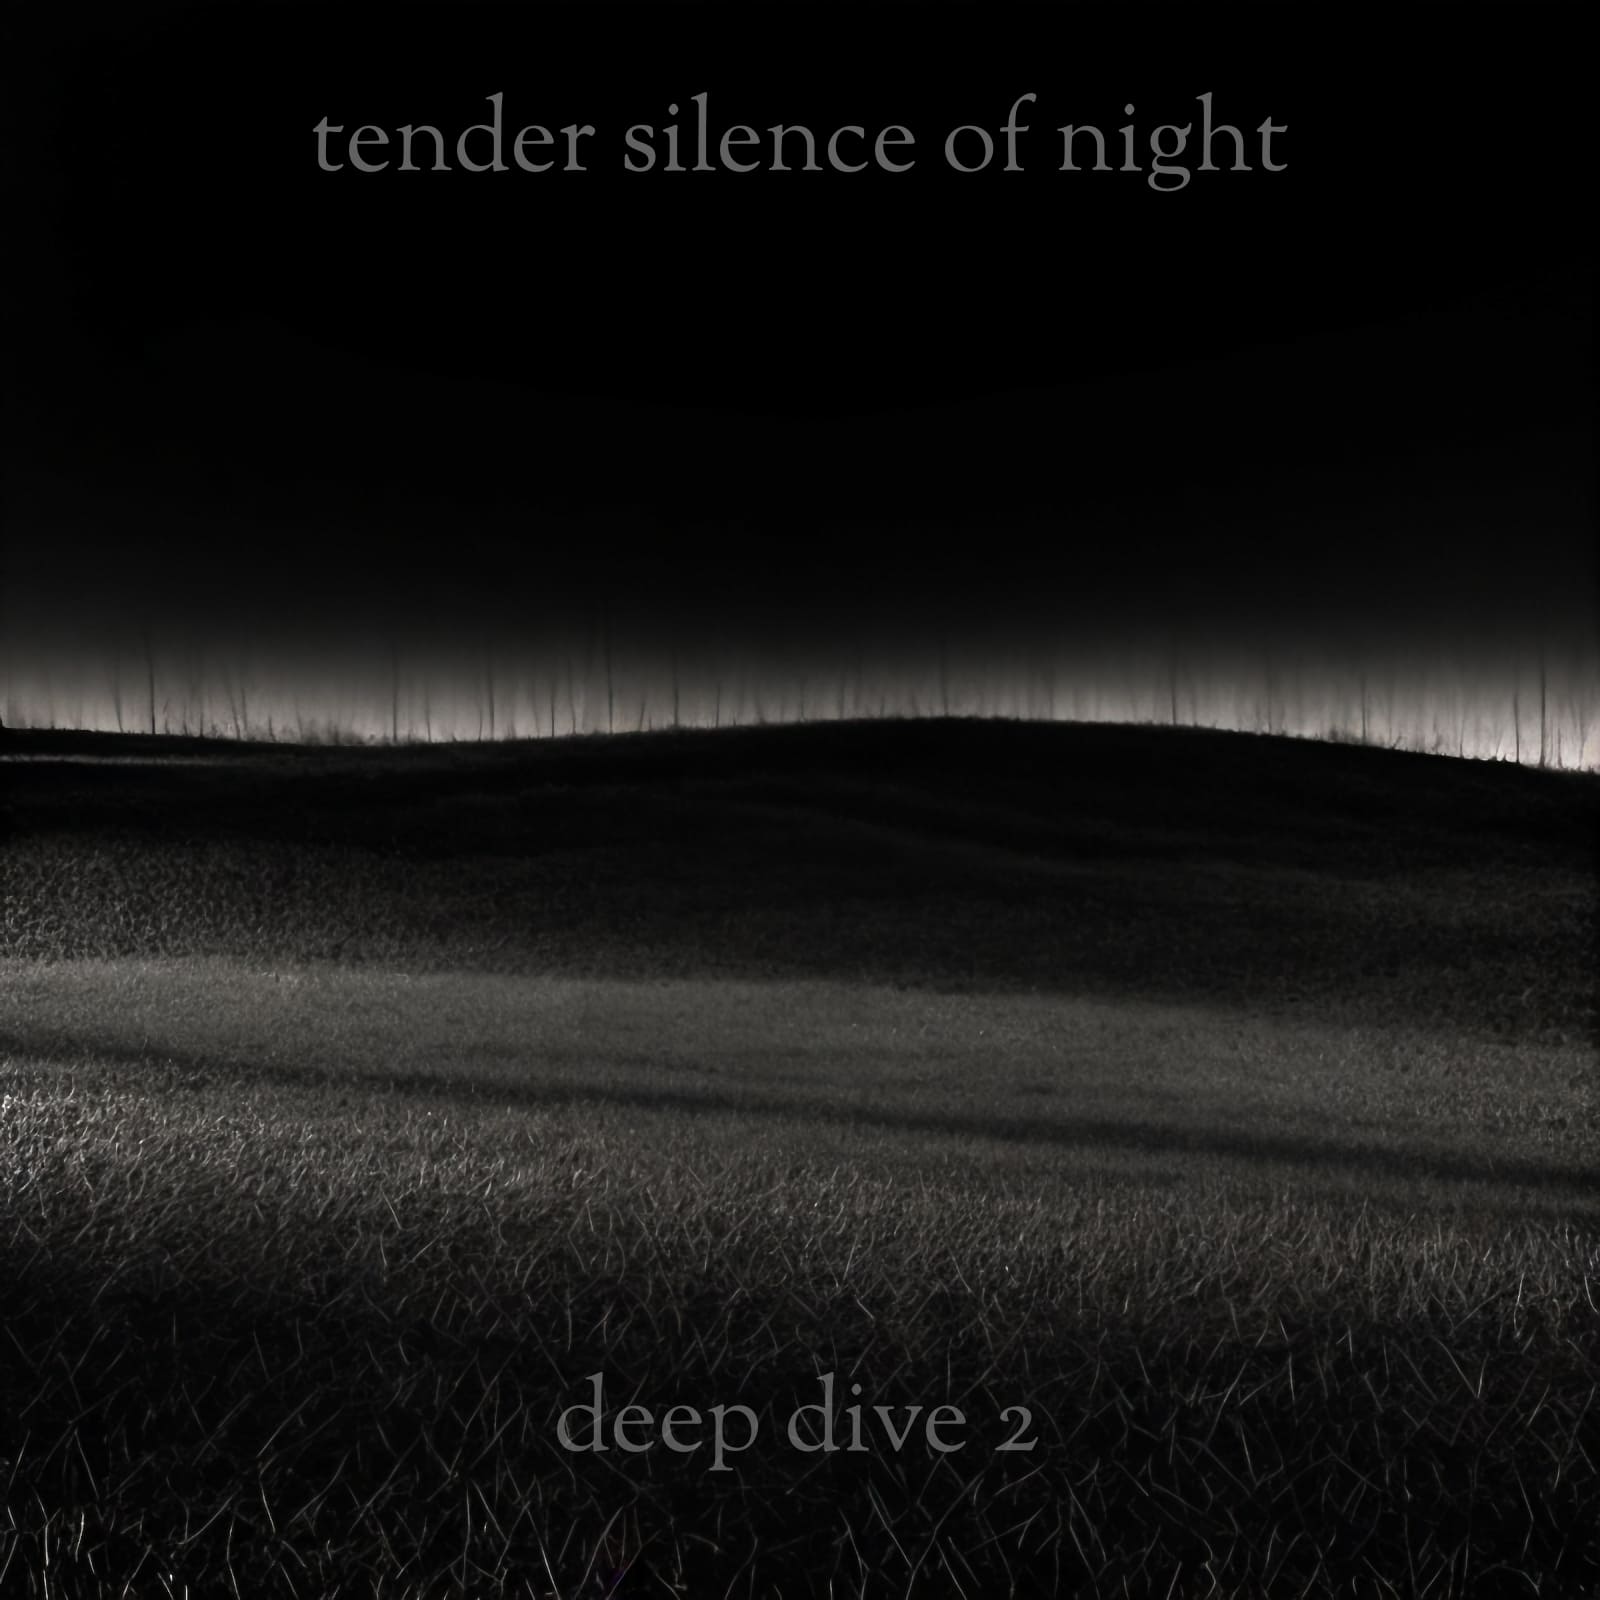 RC 384: Temder Silence of Night - Deep Dive #2 eclectic music podcast cover